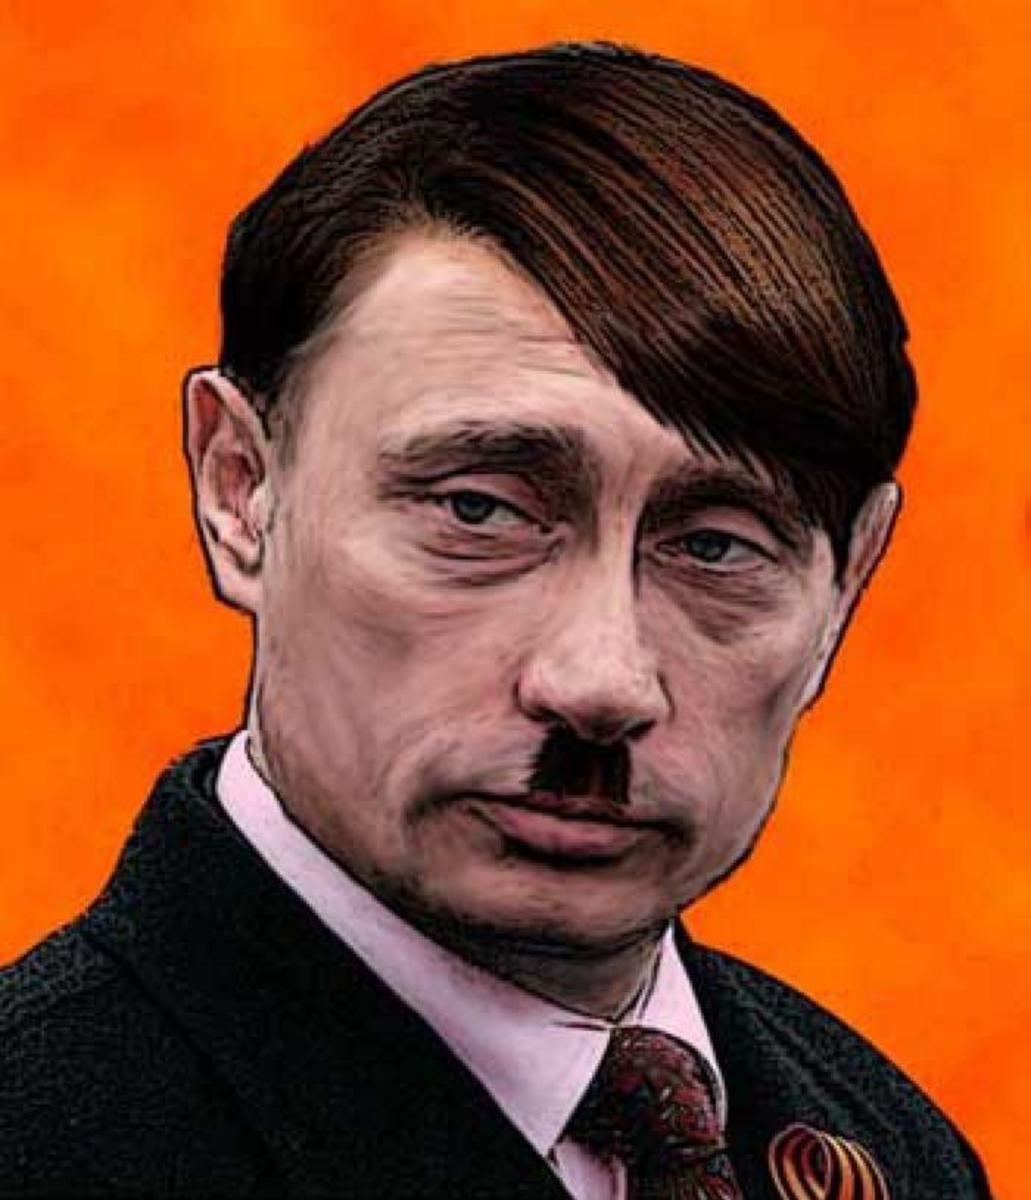 Is Putin Comparable to Hitler? Who's the Closest Historical Match for Vladimir Putin?